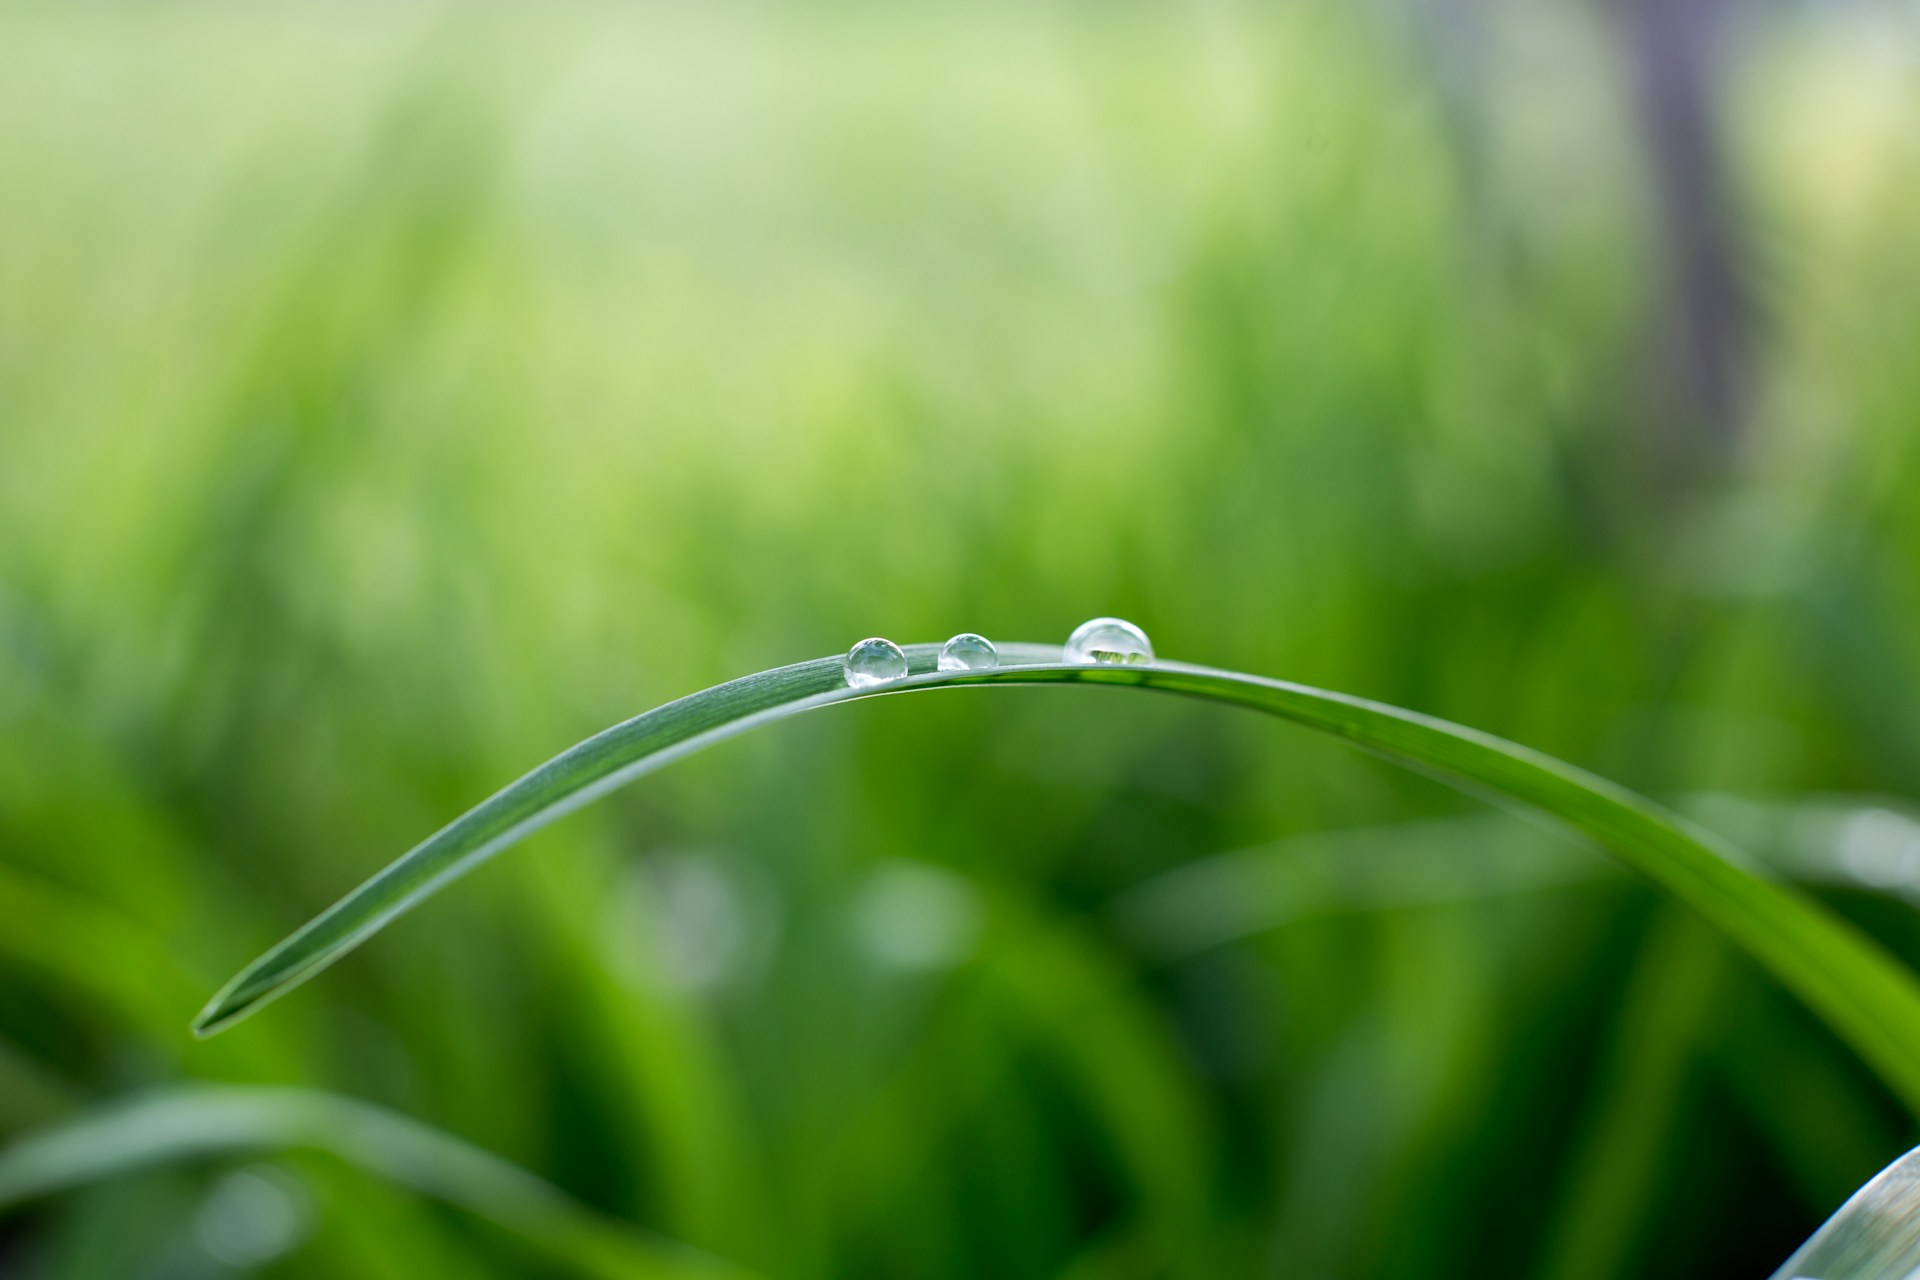 Close-up of a blade of grass with three dewdrops resting on it, offering a serene moment that feels like nature's way of coping with stress. The blurred green background suggests a lush, grassy field or garden, emphasizing the fresh and tranquil atmosphere.